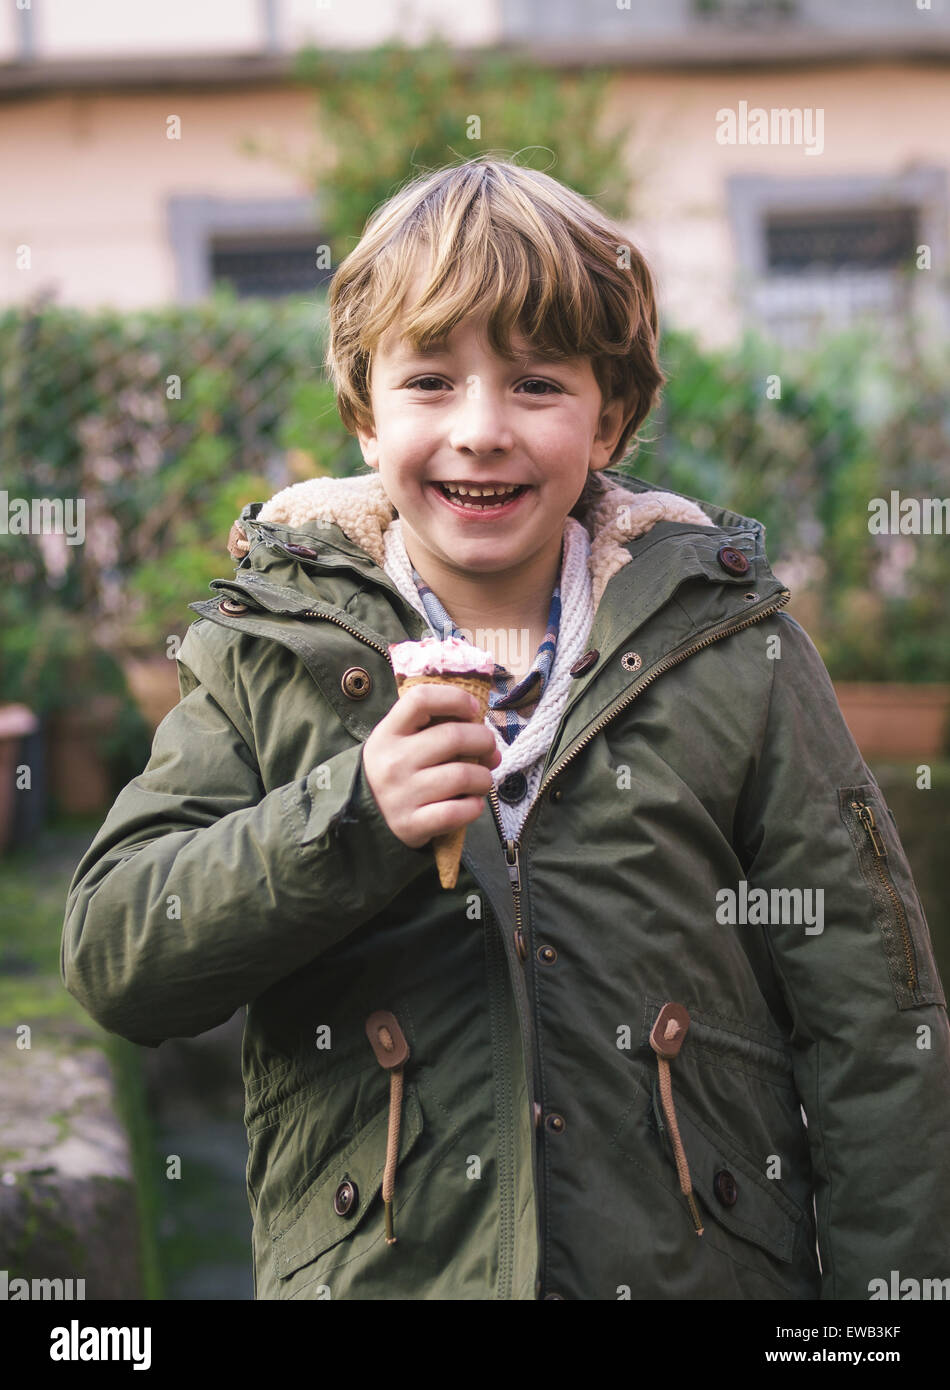 Blonde boy with an ice crean in winter. The boy is smiling. Stock Photo